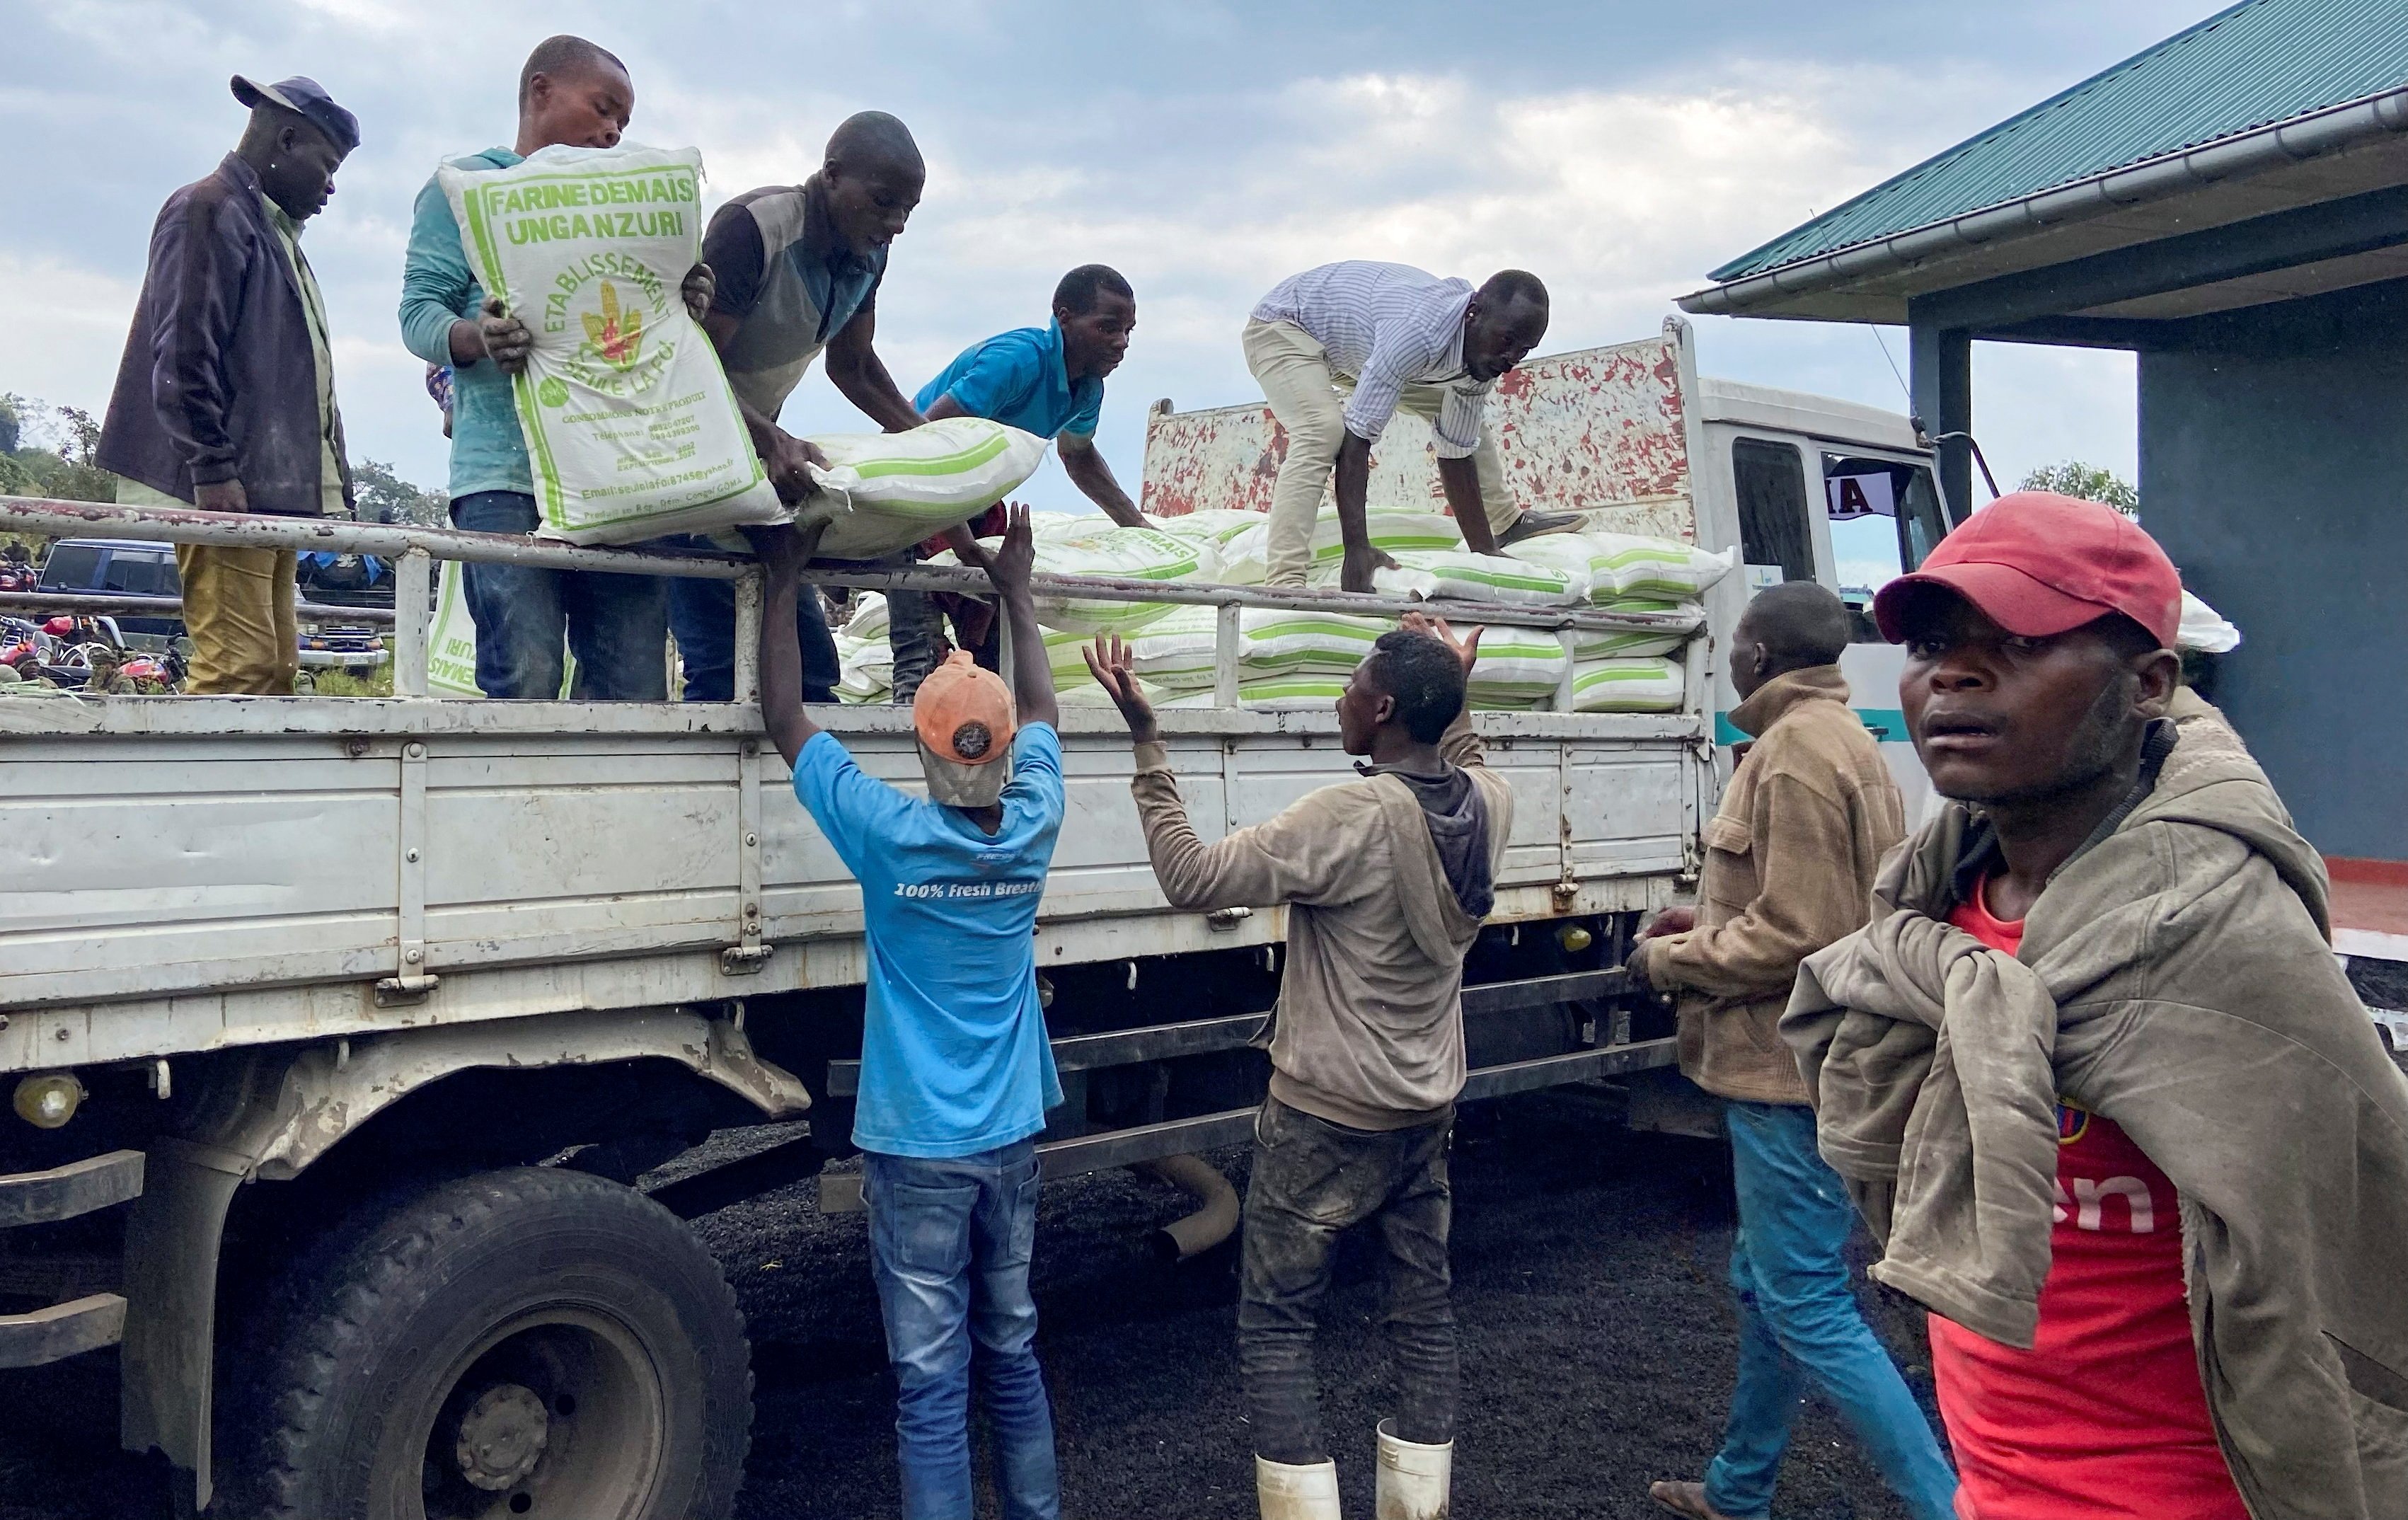 Civilians receive food aid given by the Armed Forces of the Democratic Republic of the Congo (FARDC) following renewed fighting in Kibumba, outside Goma in the North Kivu province of the Democratic Republic of Congo, June 9, 2022. (REUTERS PHOTO)